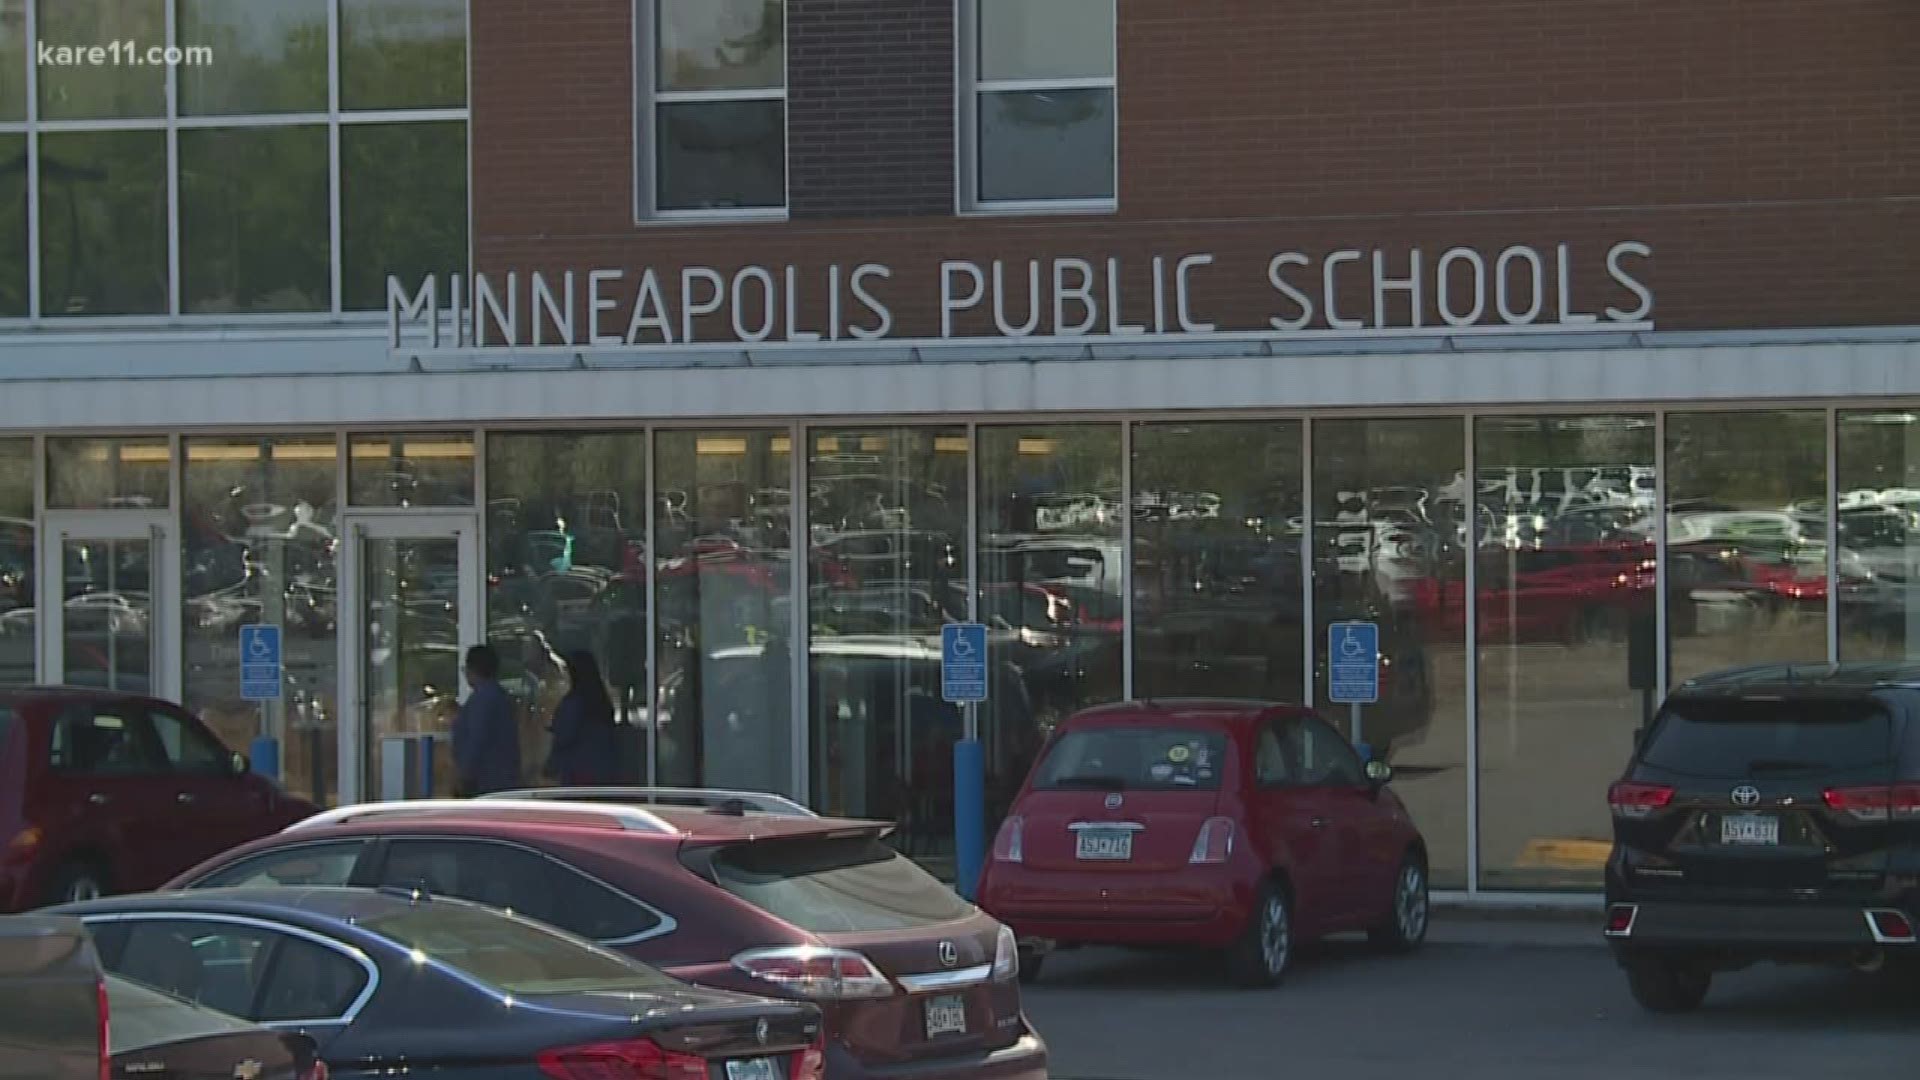 For some, the decision to take over the Minneapolis School Board meeting last night, was born out of frustration.